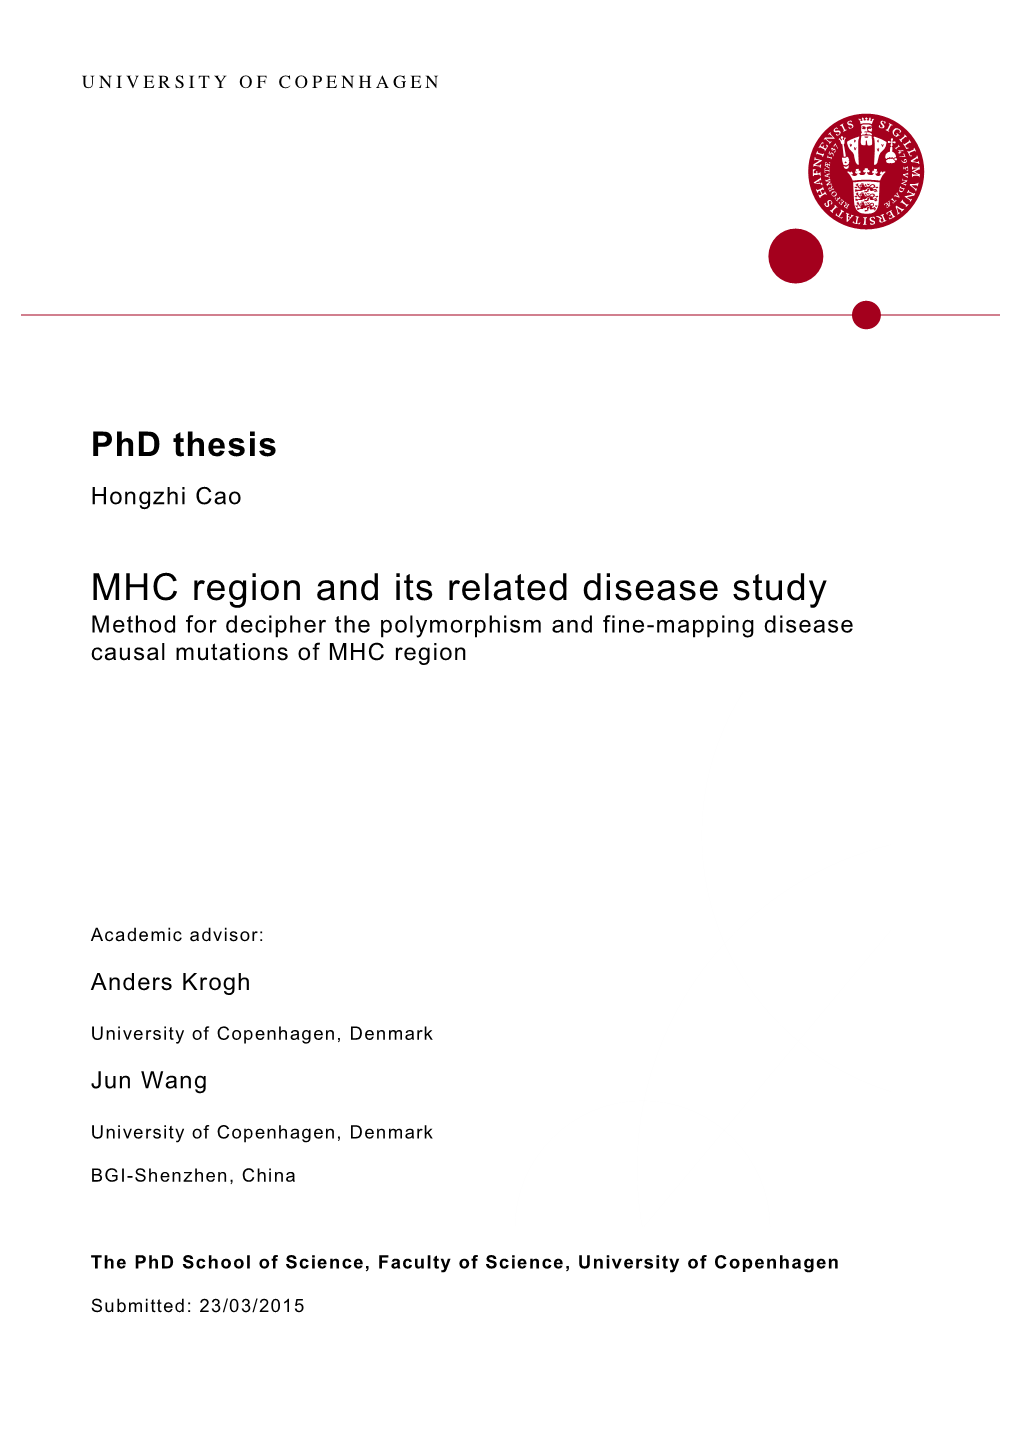 MHC Region and Its Related Disease Study